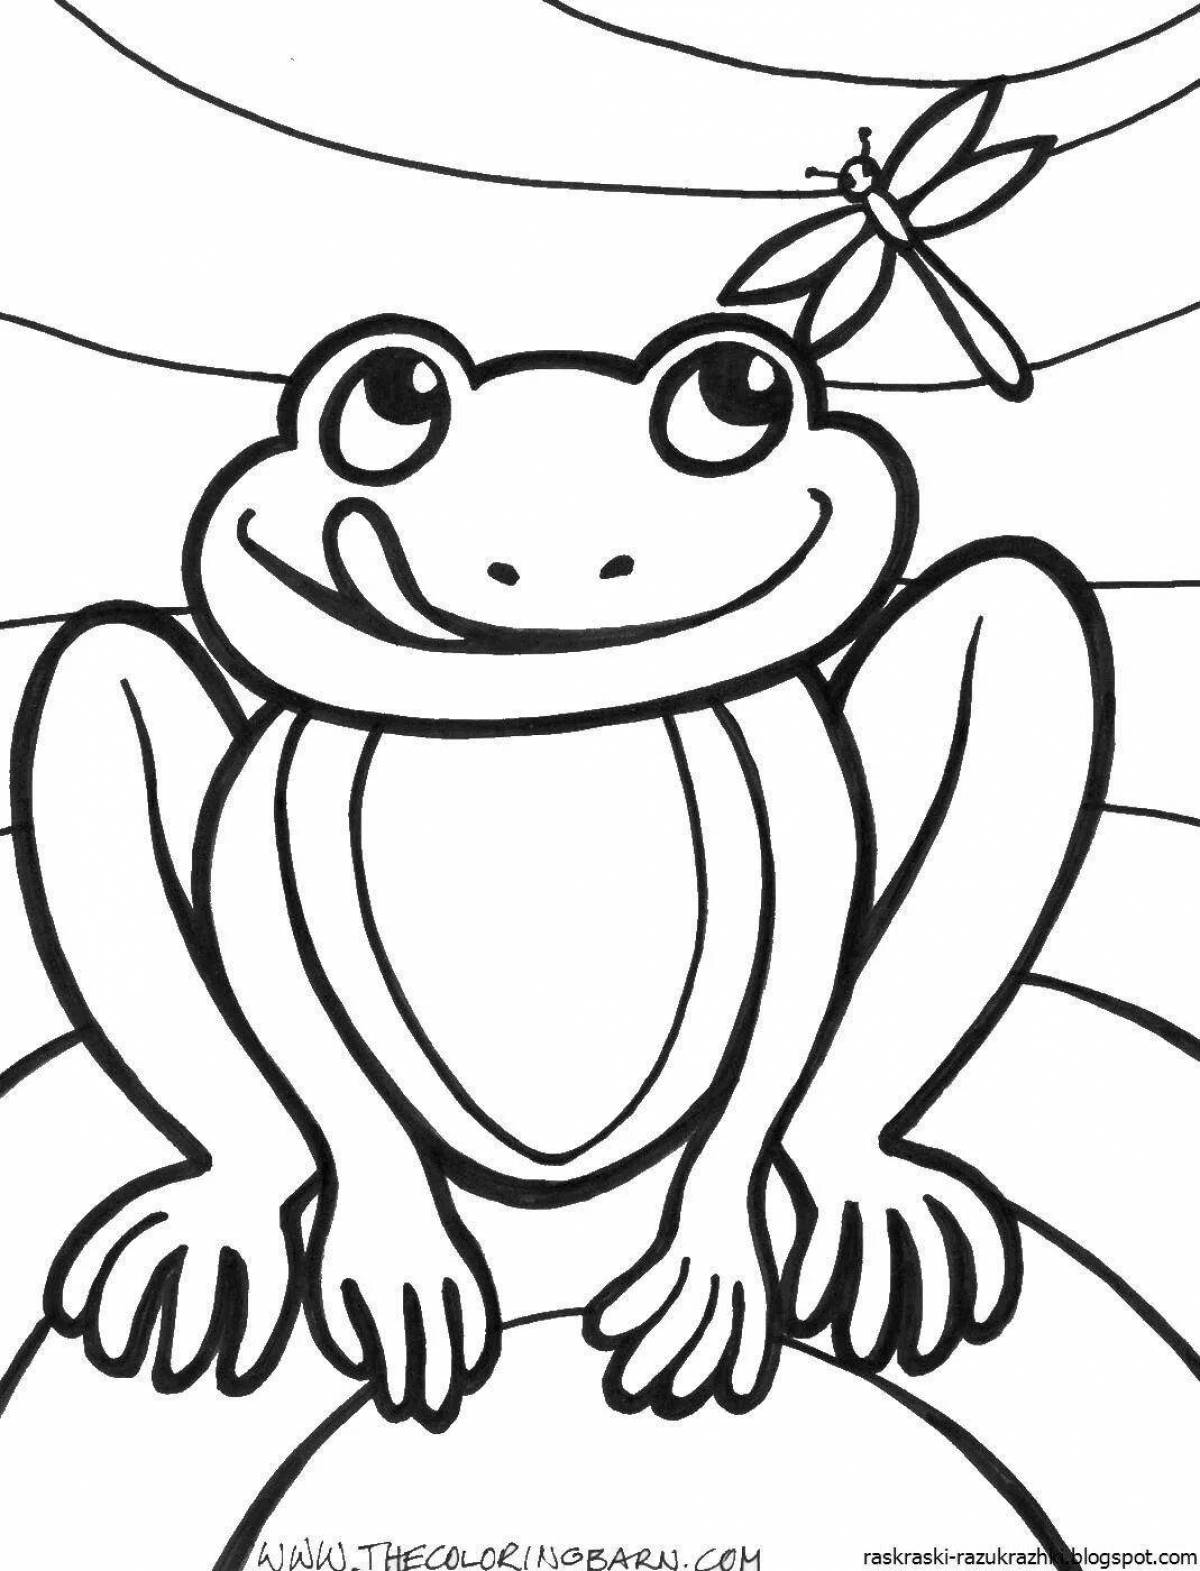 Animated drawing of a frog for kids